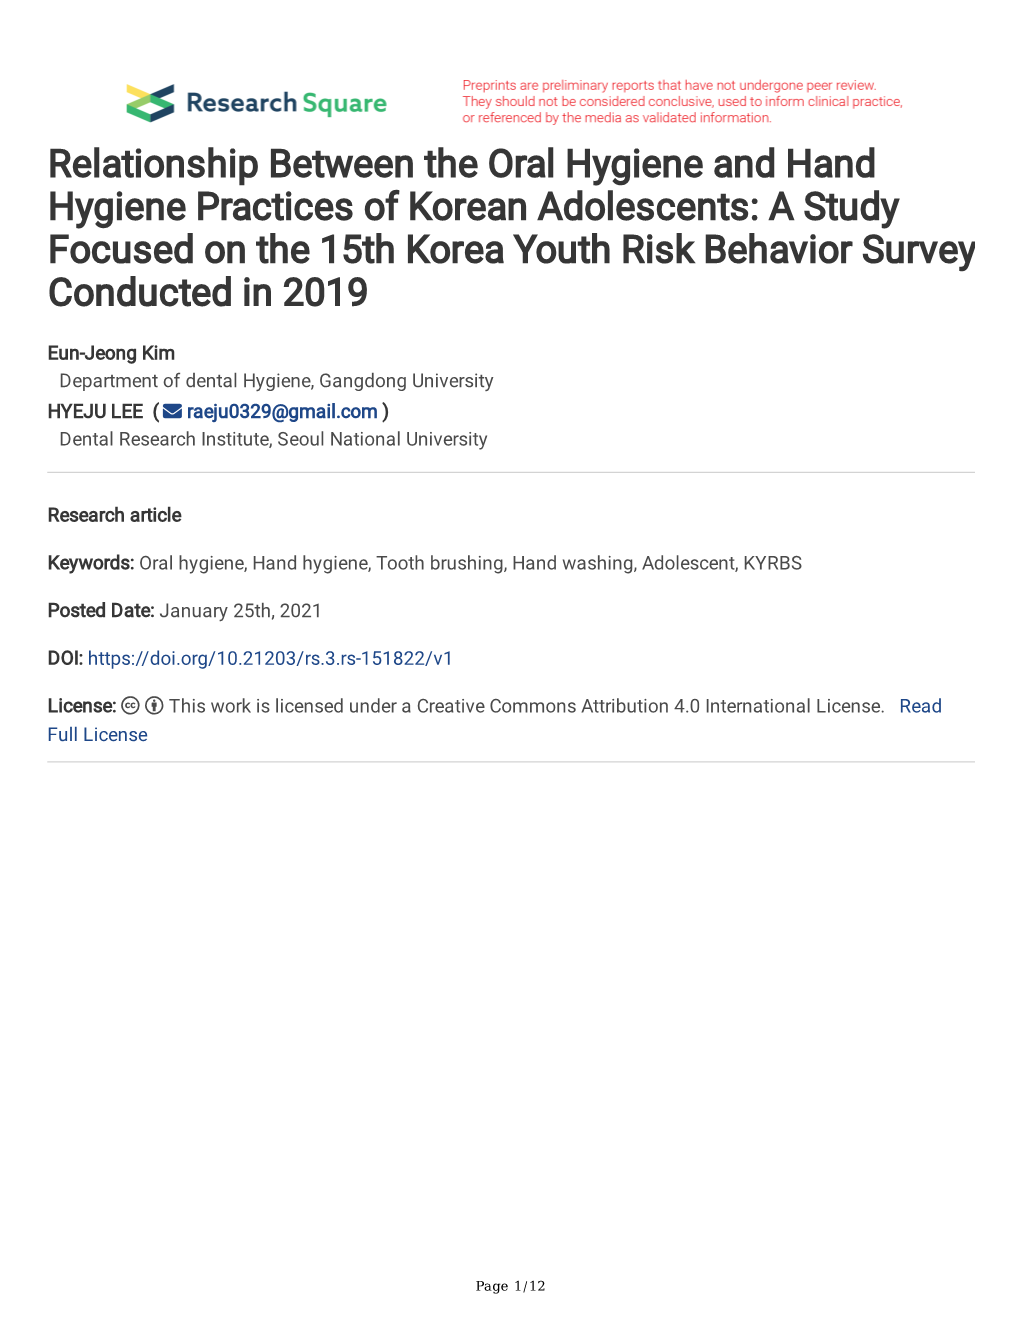 Relationship Between the Oral Hygiene and Hand Hygiene Practices of Korean Adolescents: a Study Focused on the 15Th Korea Youth Risk Behavior Survey Conducted in 2019